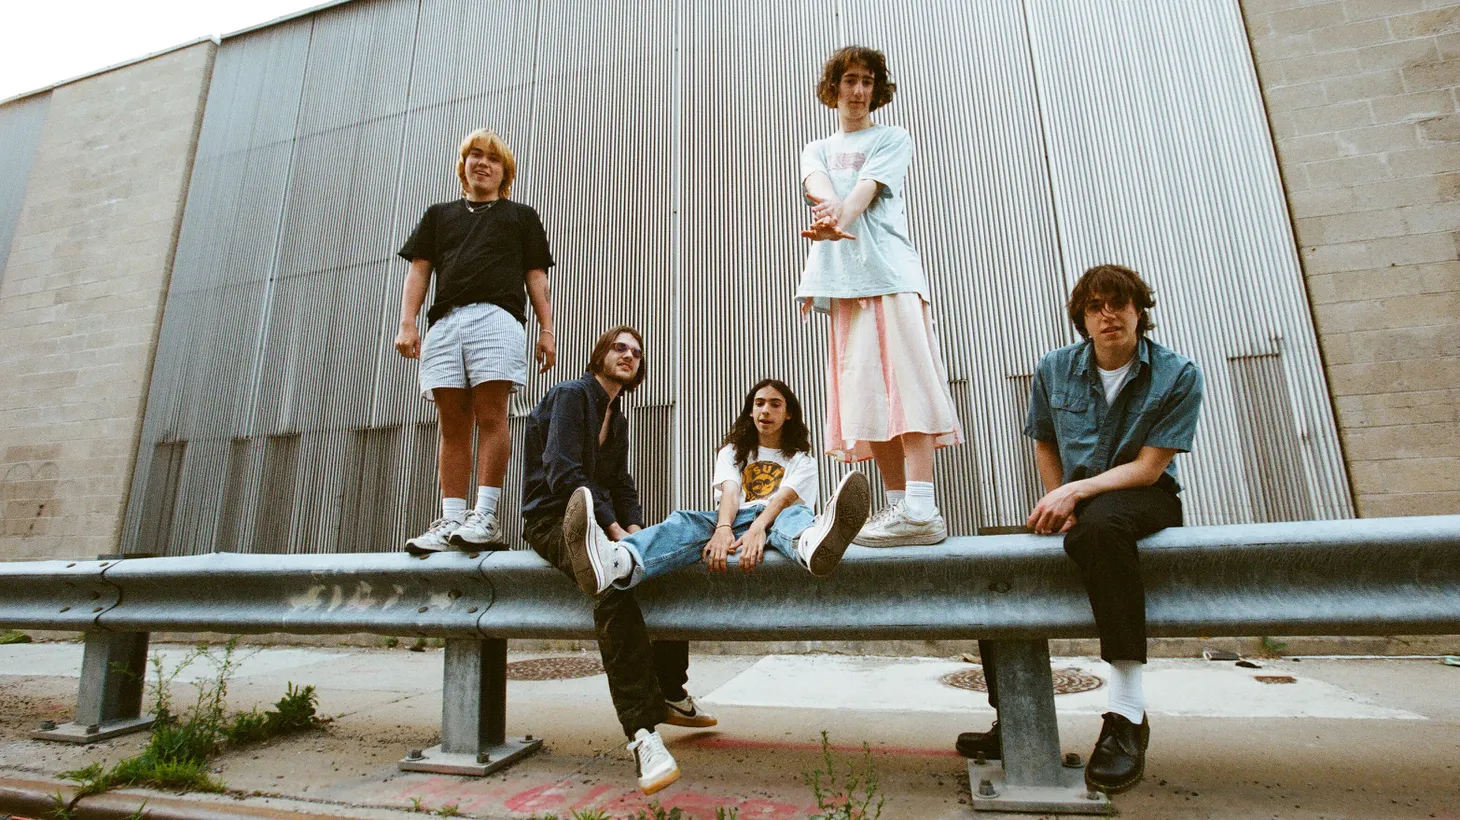 The excitement is building as fans discover Brooklyn-based outfit Geese. Before graduating from high school last year, they wrote, produced, and recorded their debut album “Projector” between getting home from school and their 10 p.m. curfew.